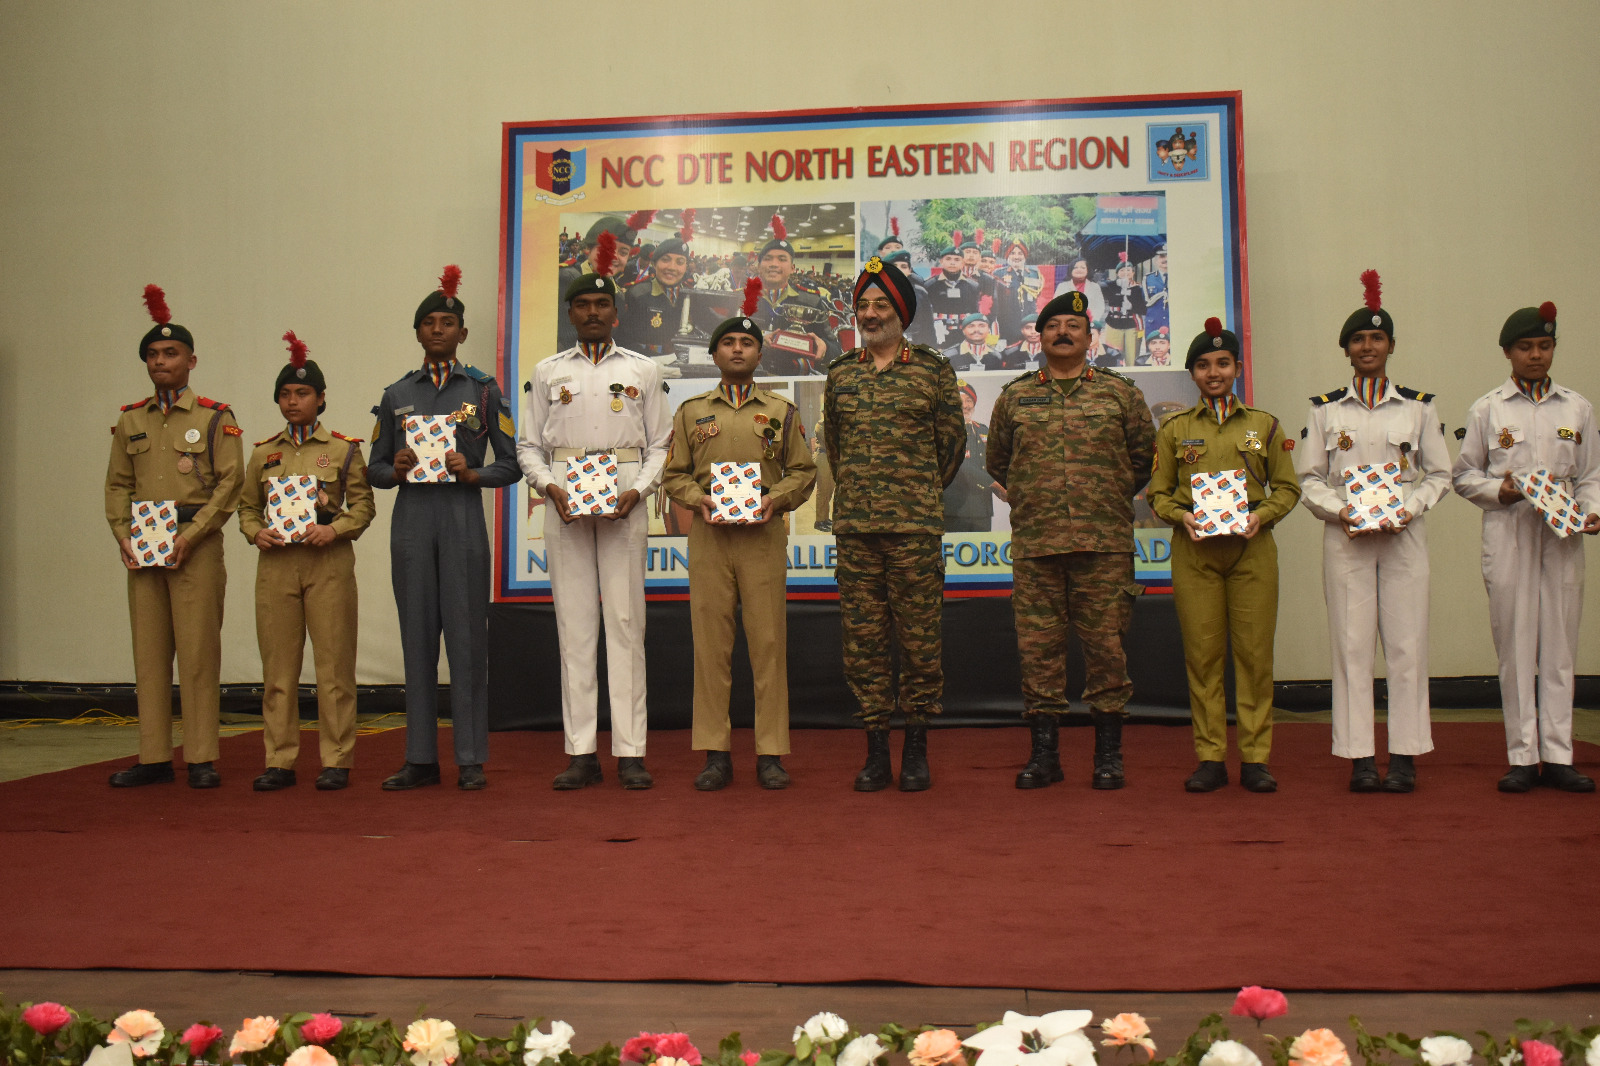 Lt Gen Gurbirpal Singh PVSM, AVSM, VSM, DGNCC (Directorate General of National Cadet Corps) proudly hosted an award ceremony at Narangi, Guwahati, honouring the exemplary achievements and contributions of NCC cadets, Associate NCC Officers (ANO), Girls Cadet Instructors (GCI) and Principals of best Institutions.